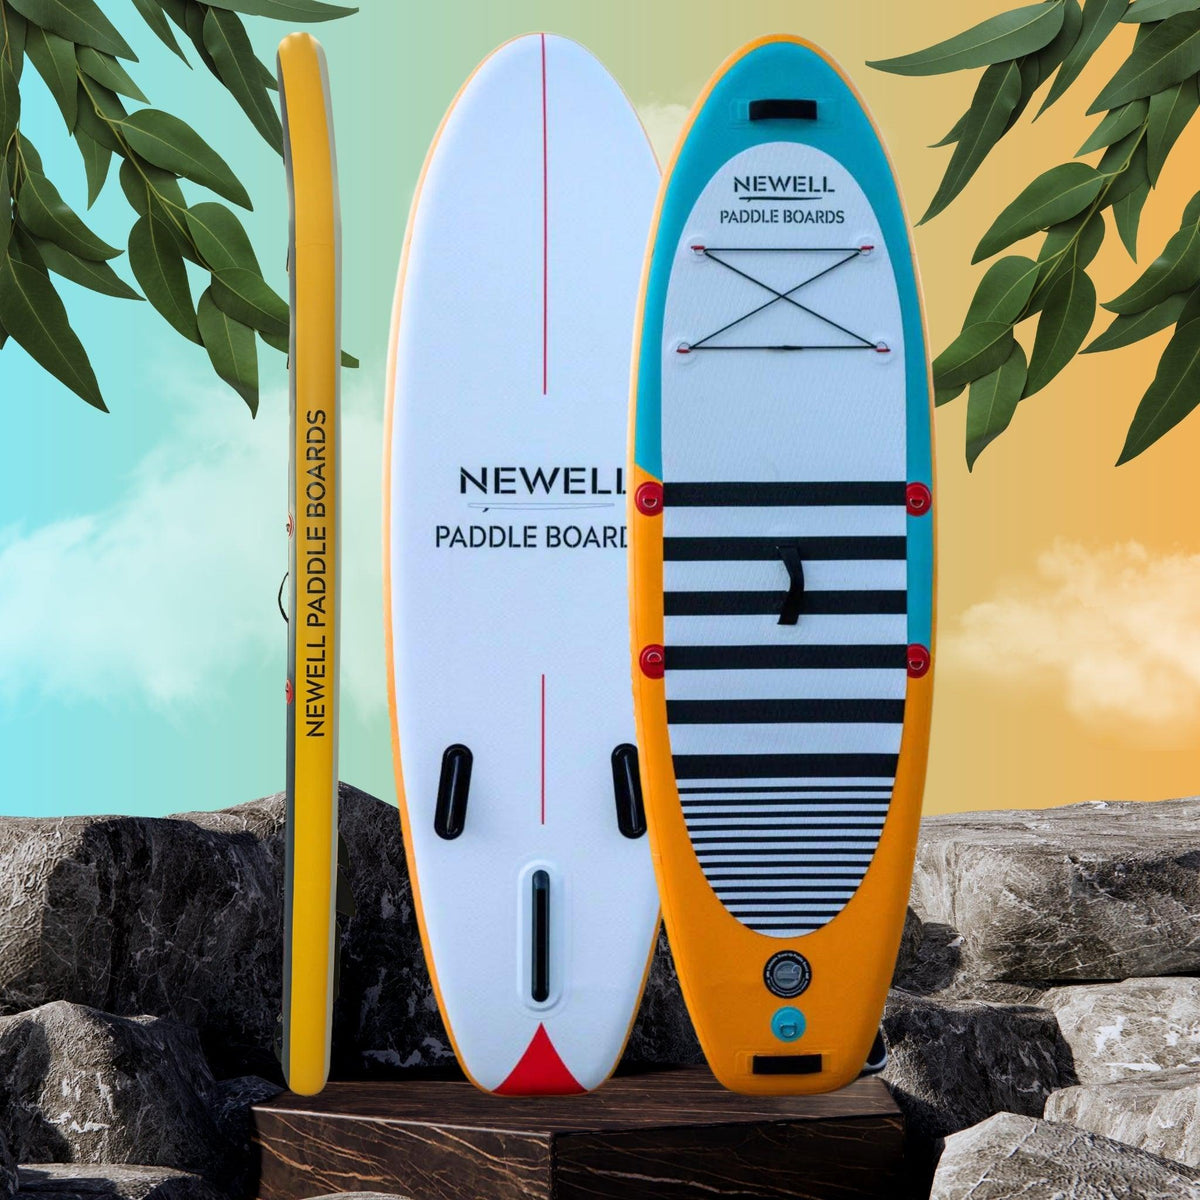 The Wippersnapper paddleboard for kids against a colorful background.